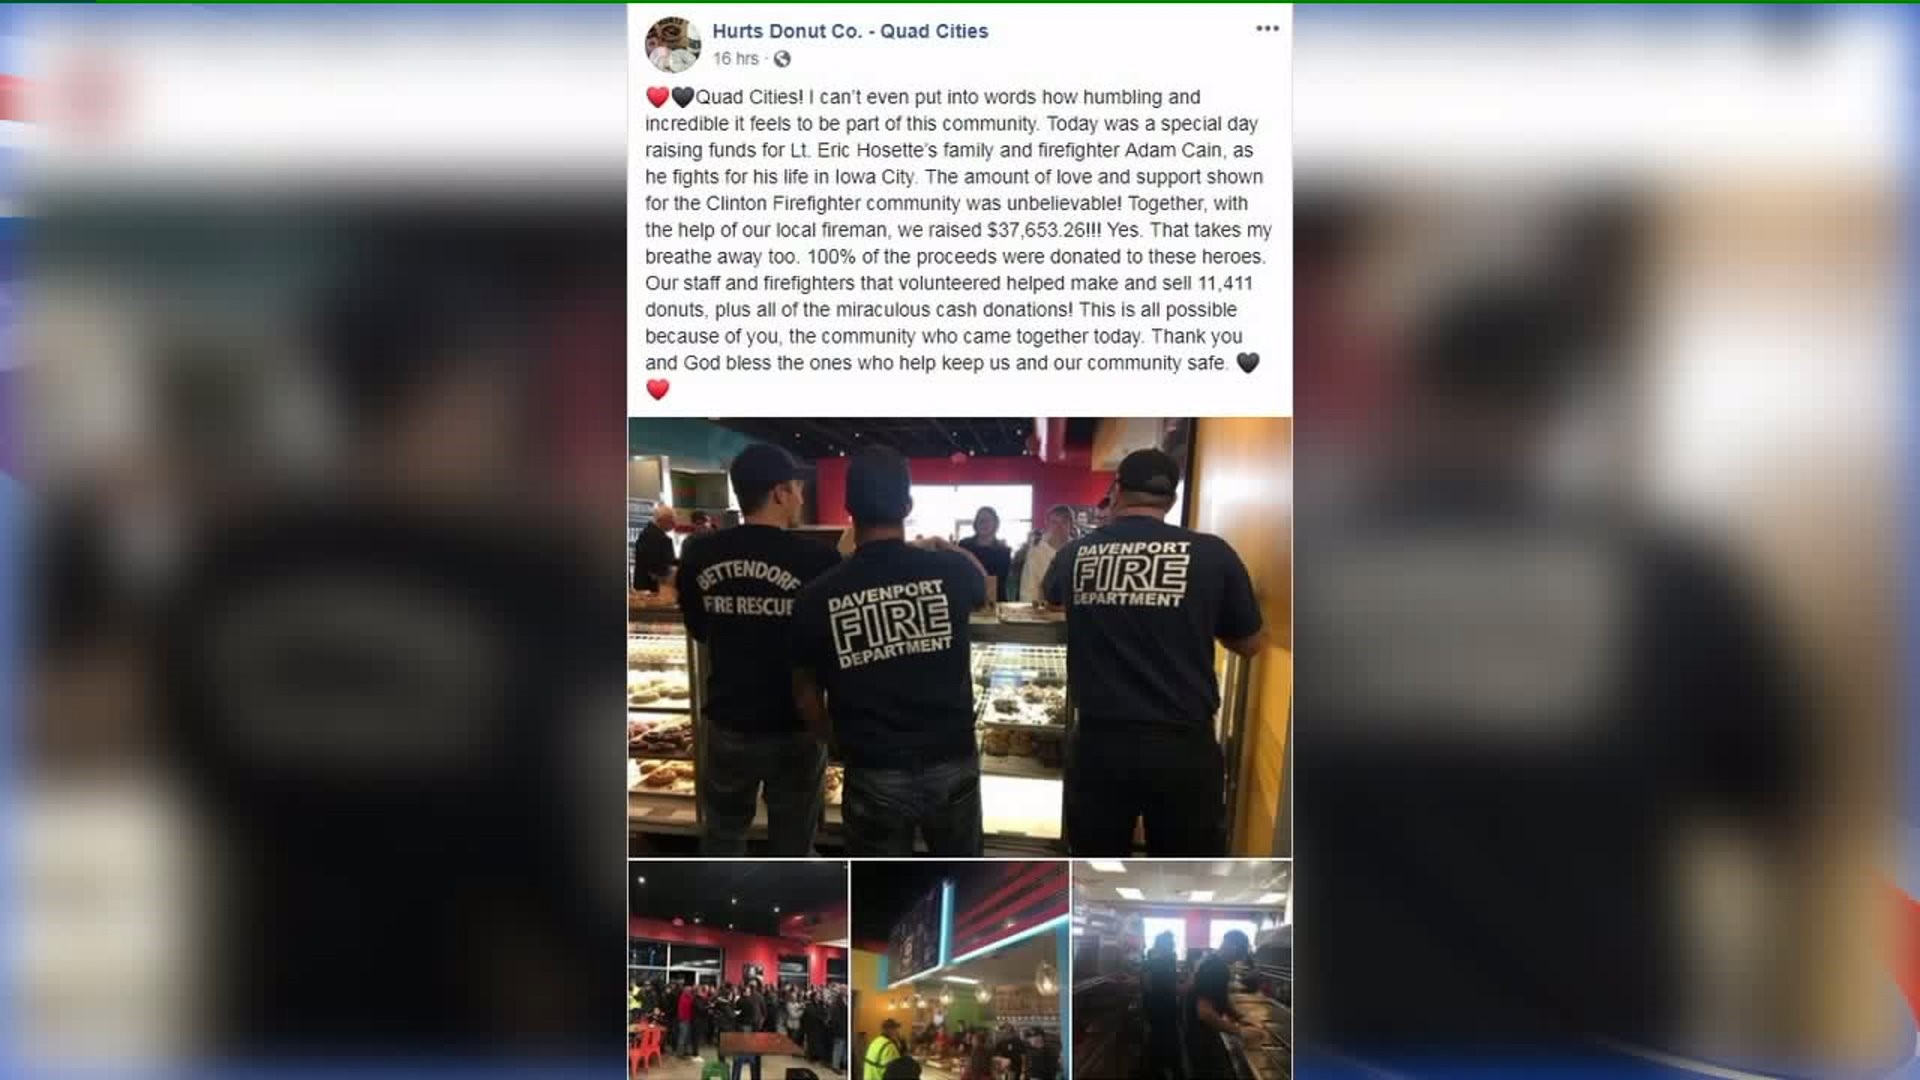 Hurts Donuts Company helps raise more than $37,000 for families of Clinton firefighters